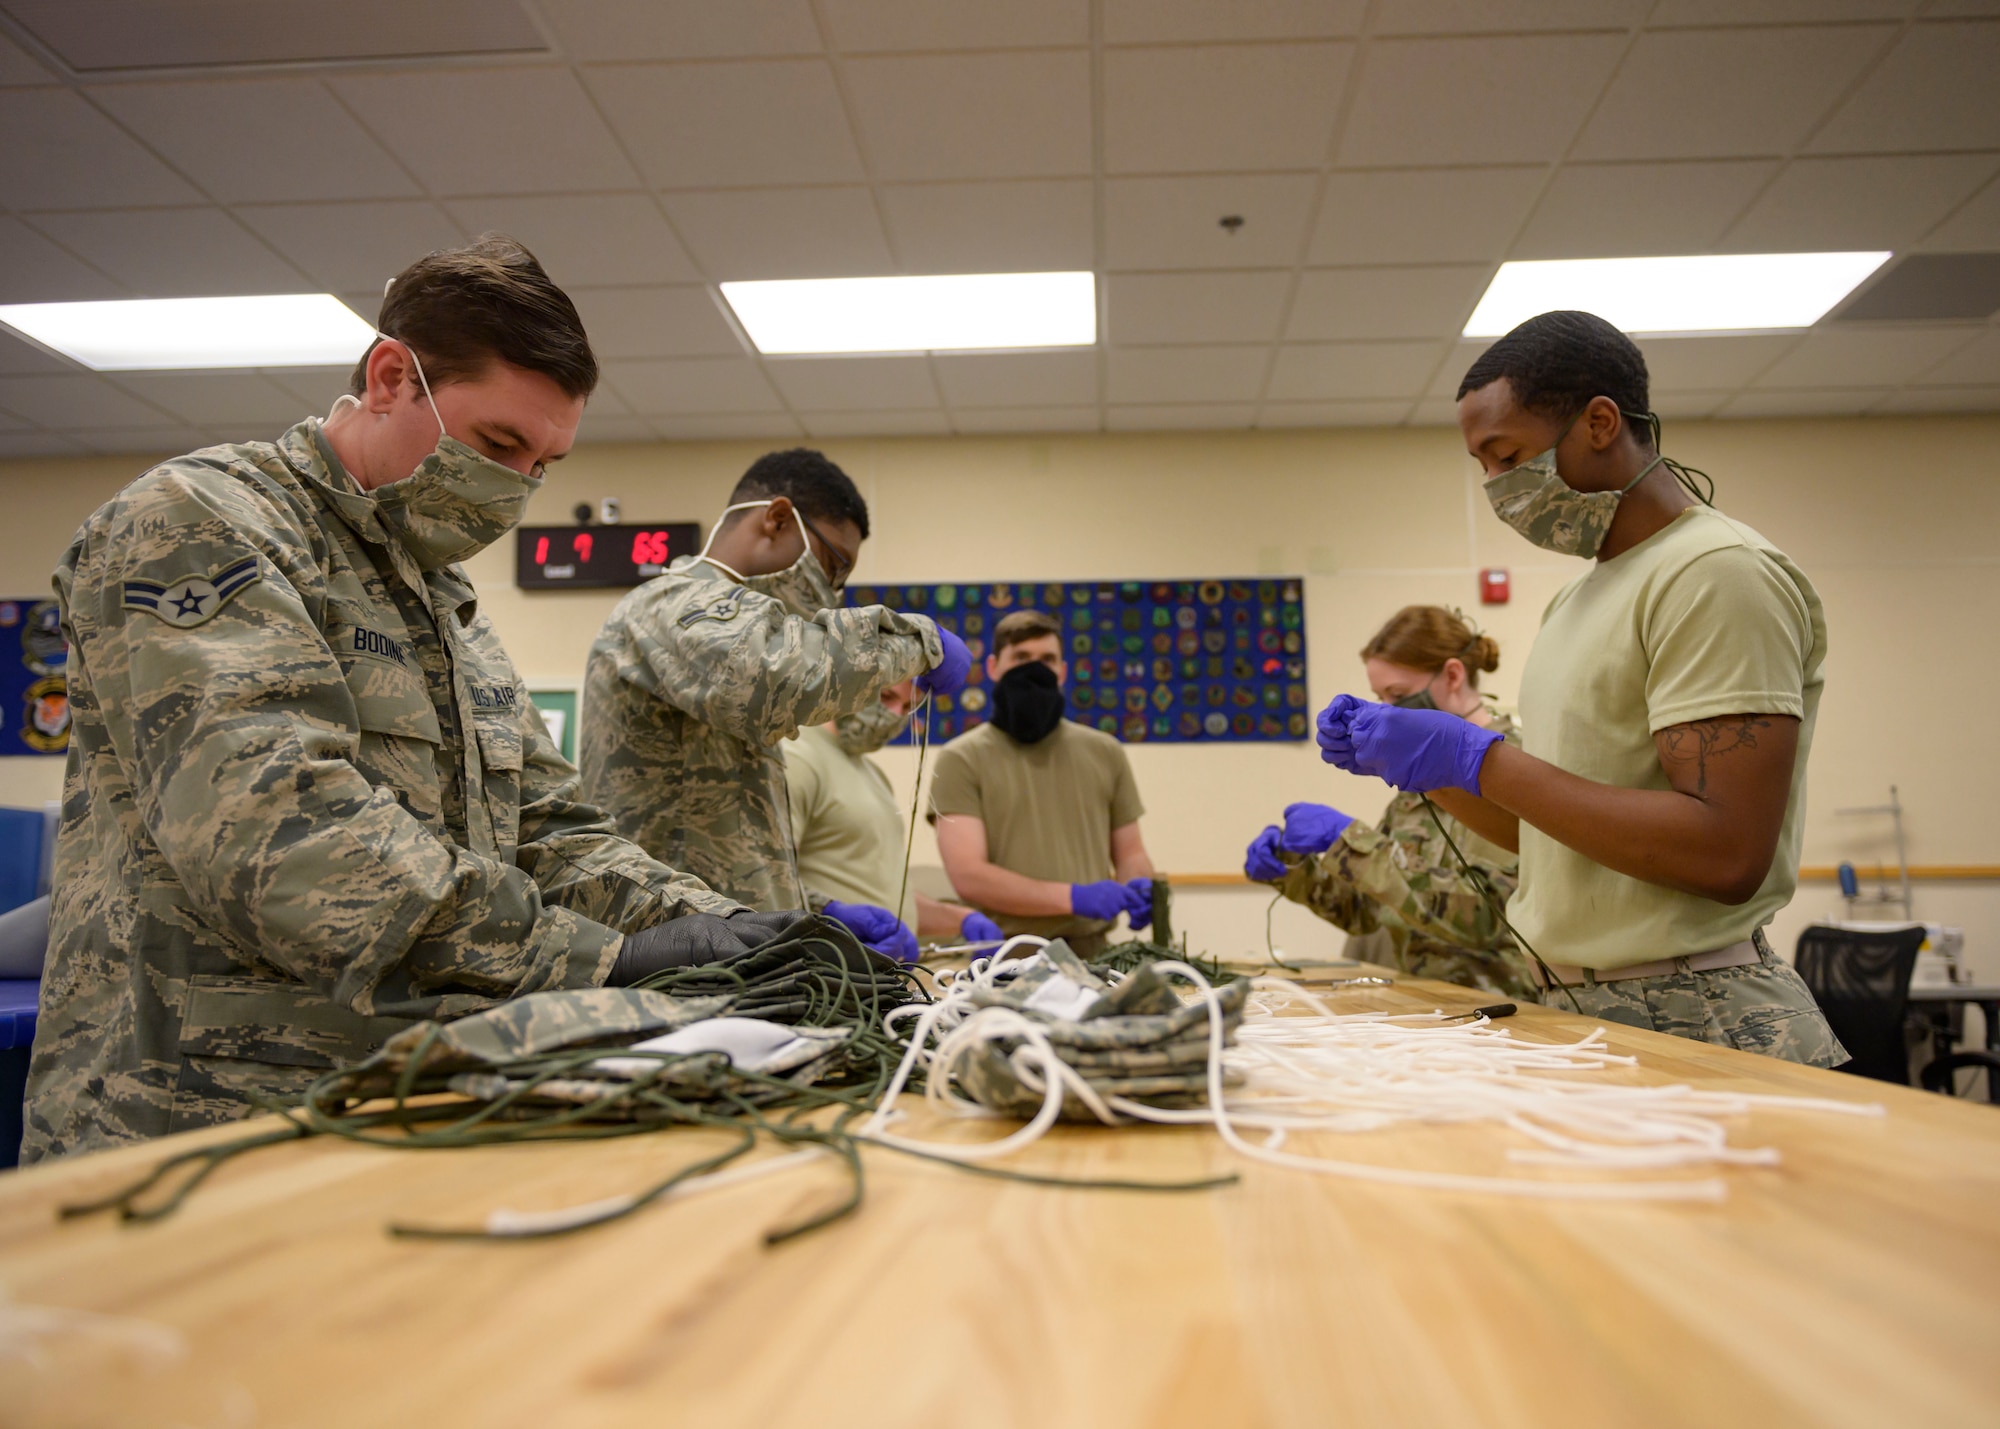 Airmen from the 366th Operations Support Squadron, craft masks for personnel on base, March 20, 2020, at Mountain Home Air Force Base, Idaho. These masks are designed in a multi-layer style to maintain a proper barrier. (U.S. Air Force photo by Senior Airman Tyrell Hall)